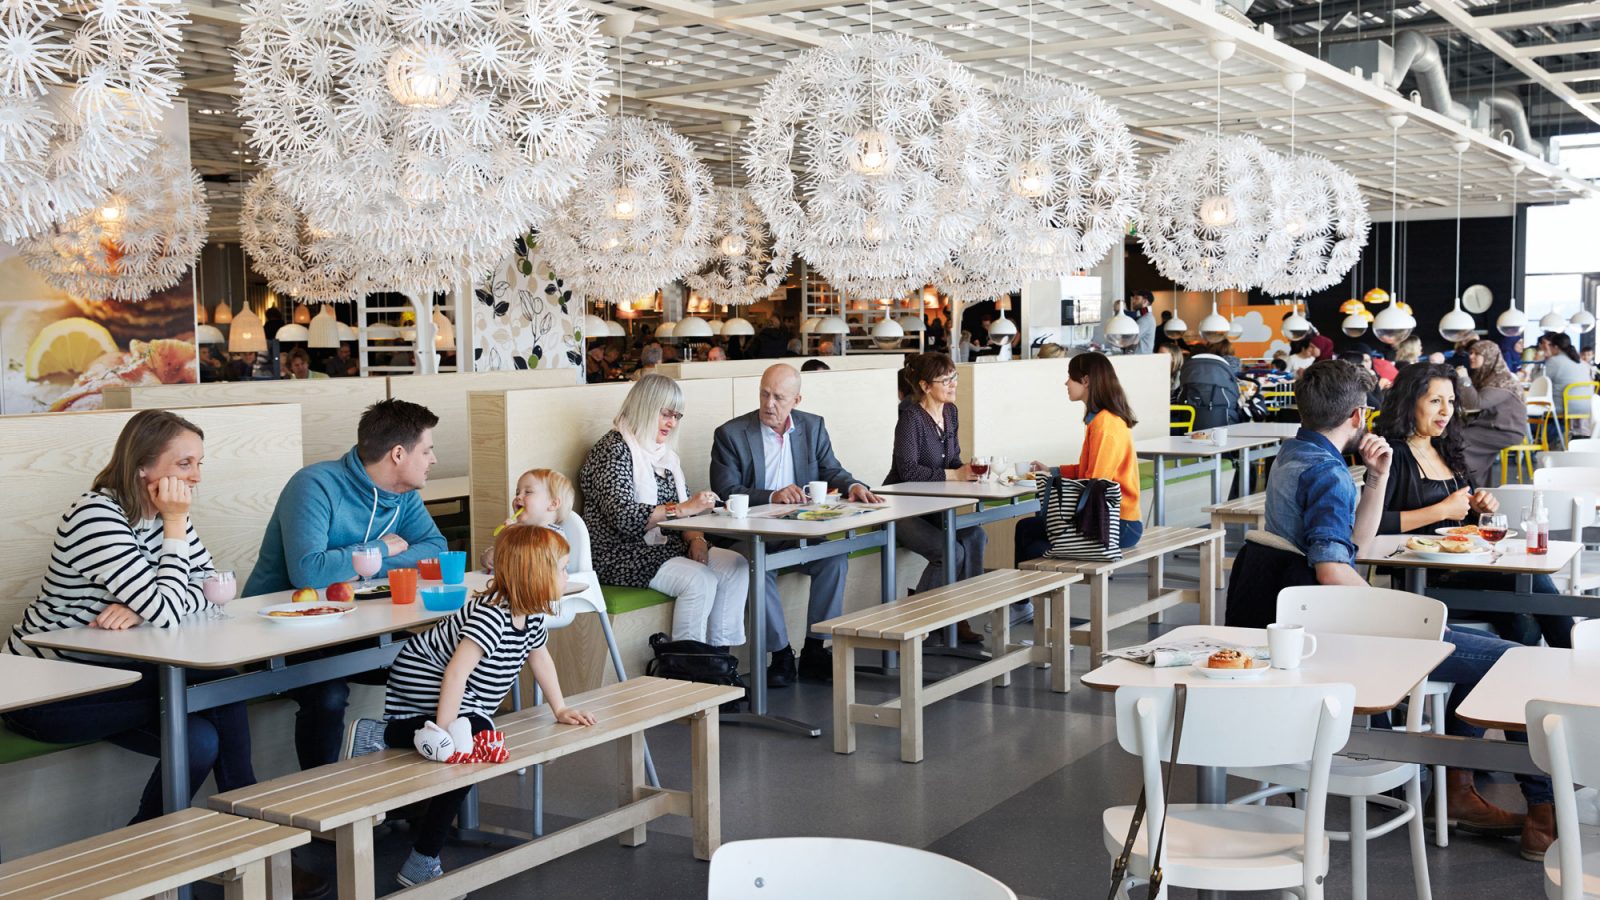 Families with children and couples eat under large white lamps in an airy contemporary IKEA restaurant with wooden furniture.